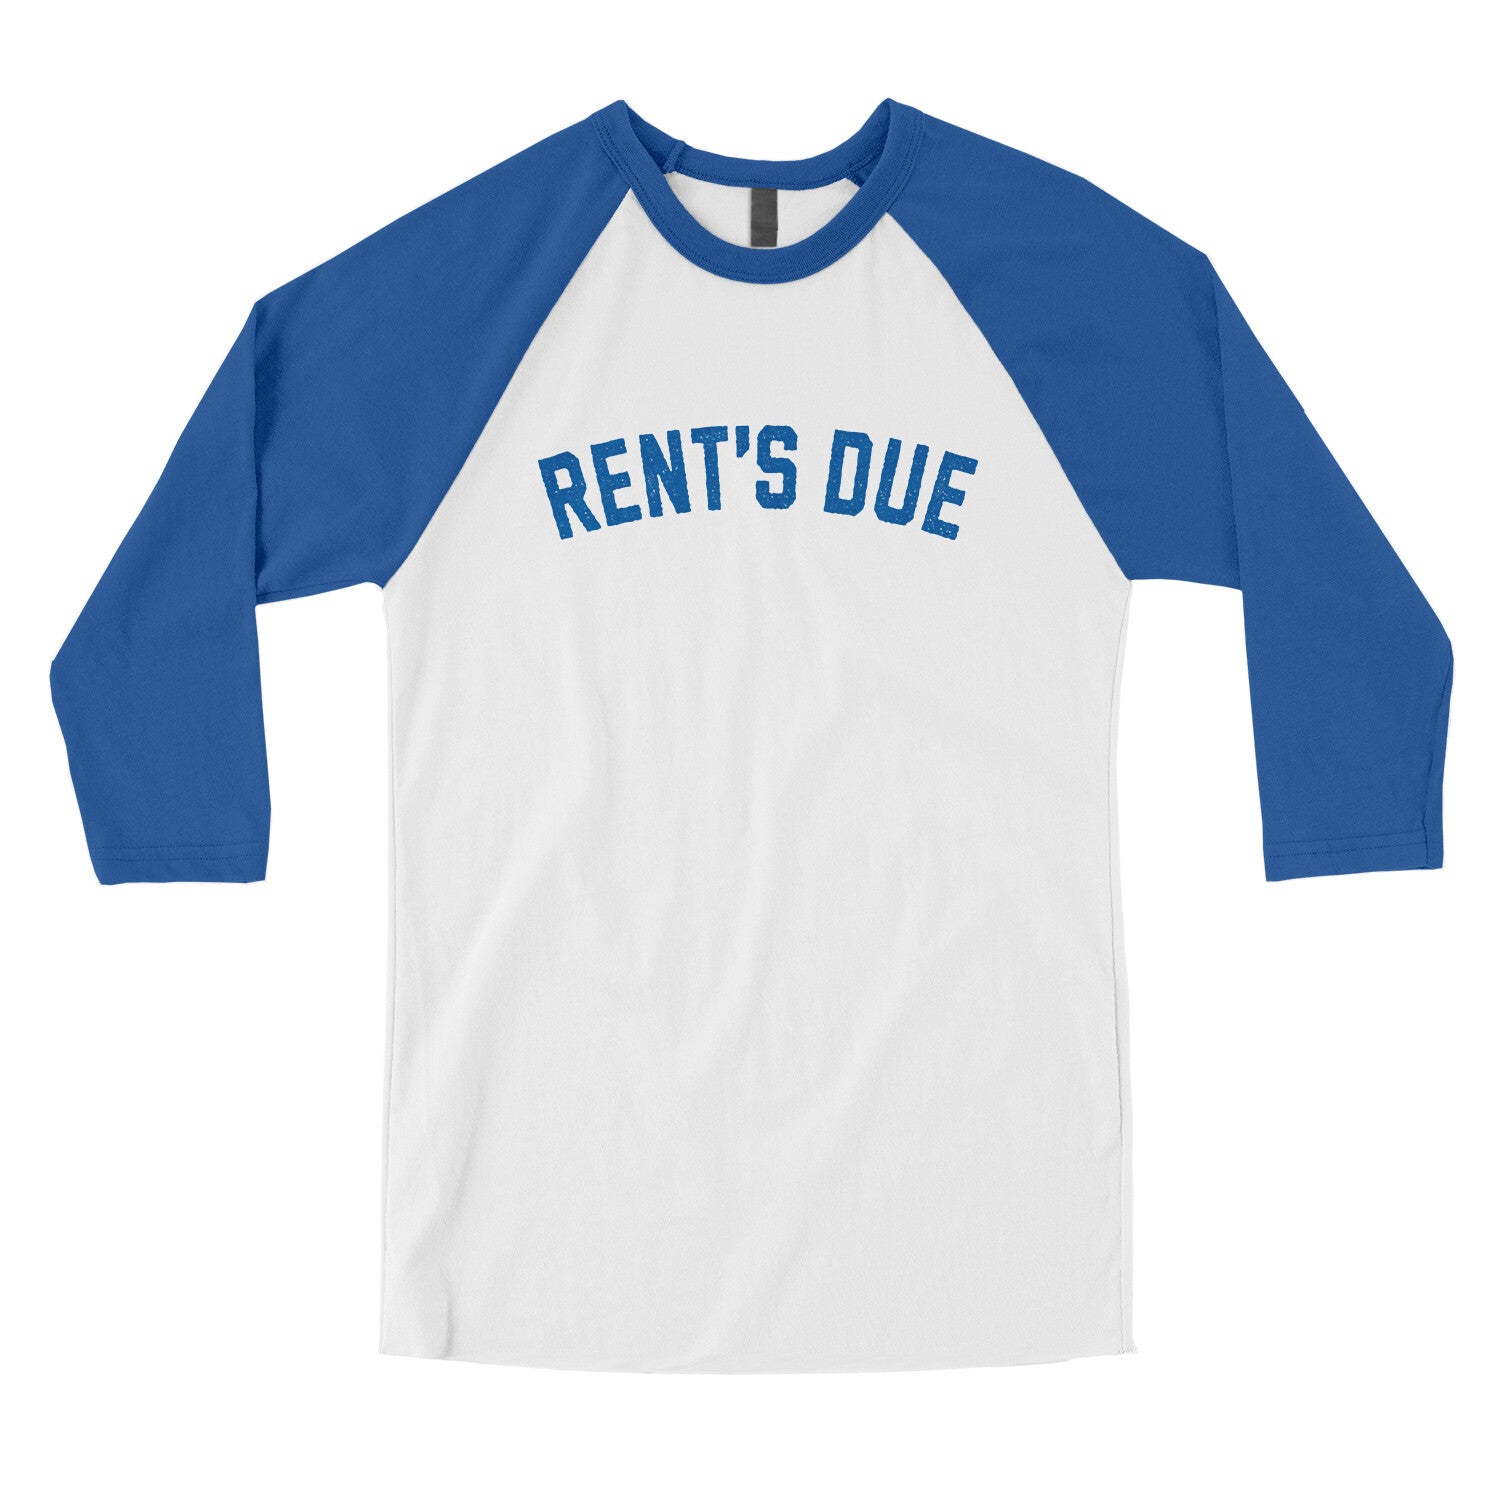 Rent's Due in White with True Royal Color